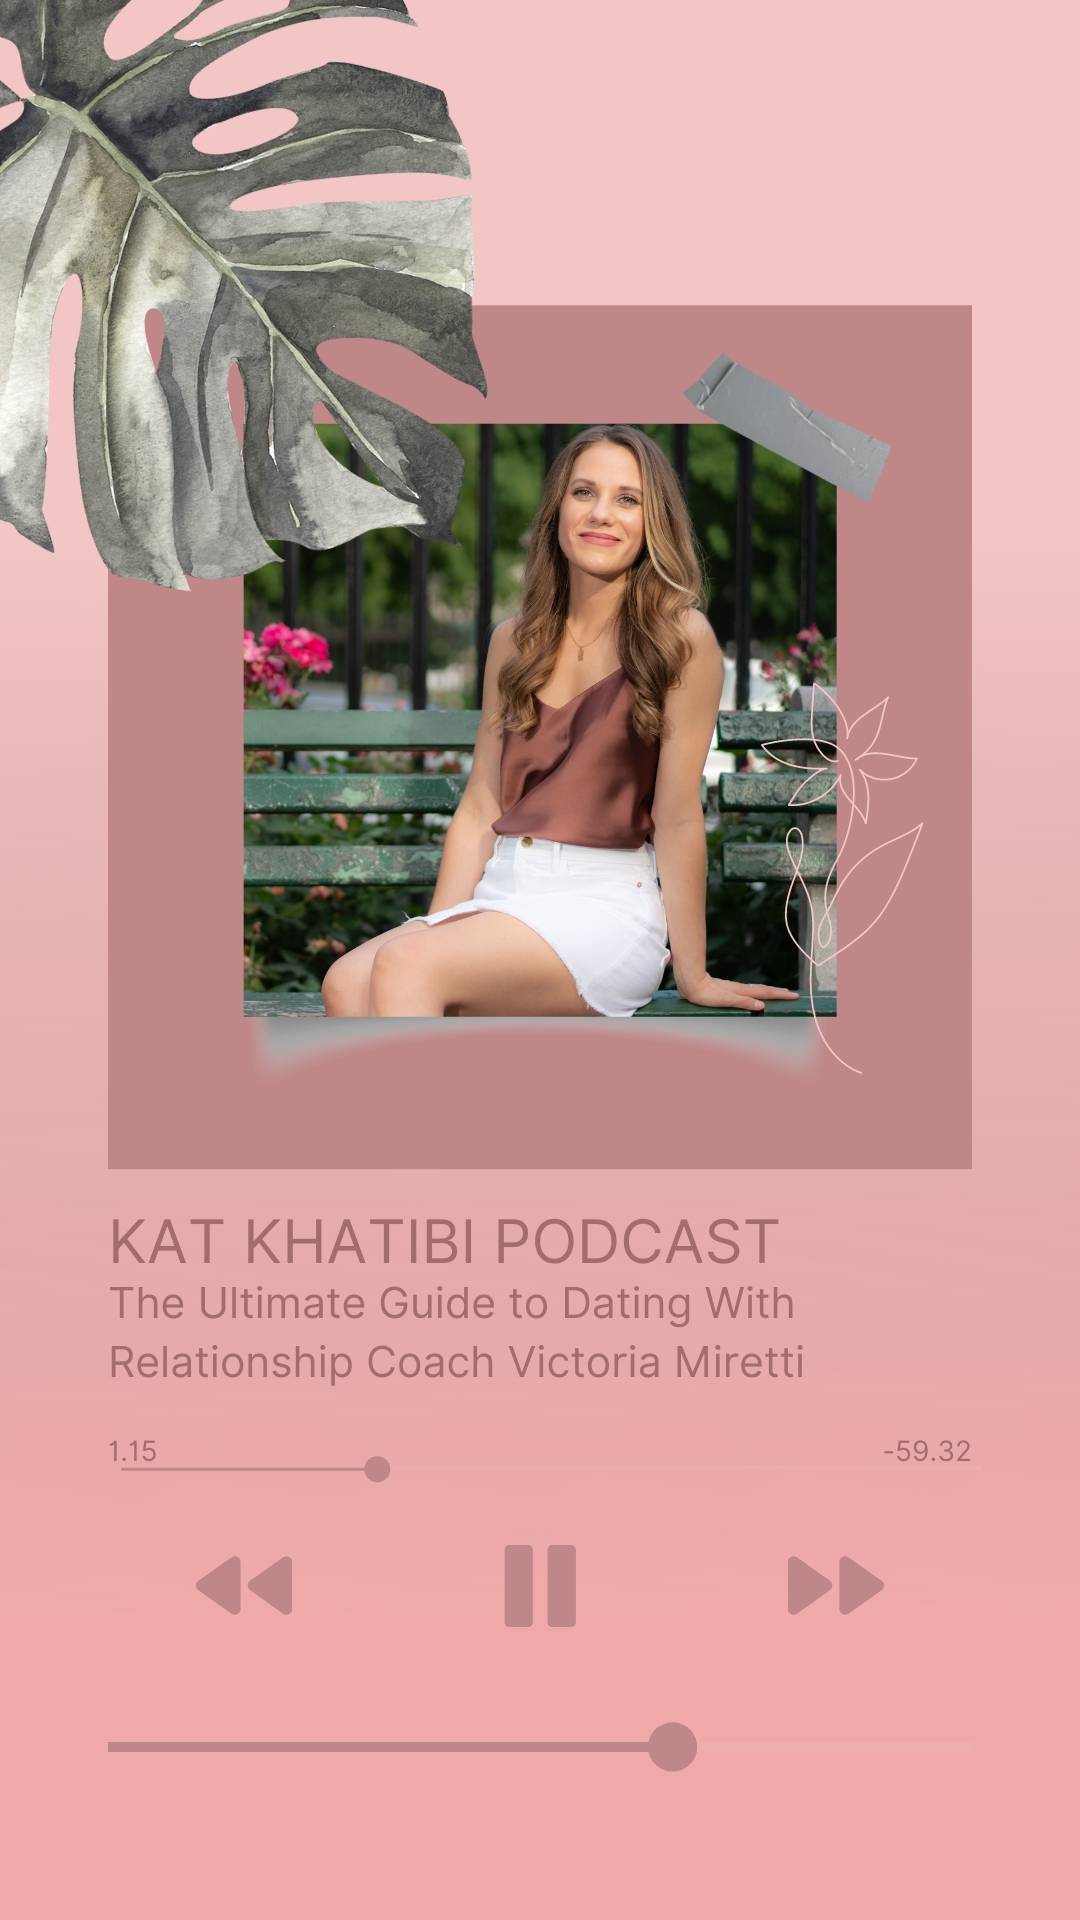 The Ultimate Guide to Dating With Relationship Coach Victoria Miretti